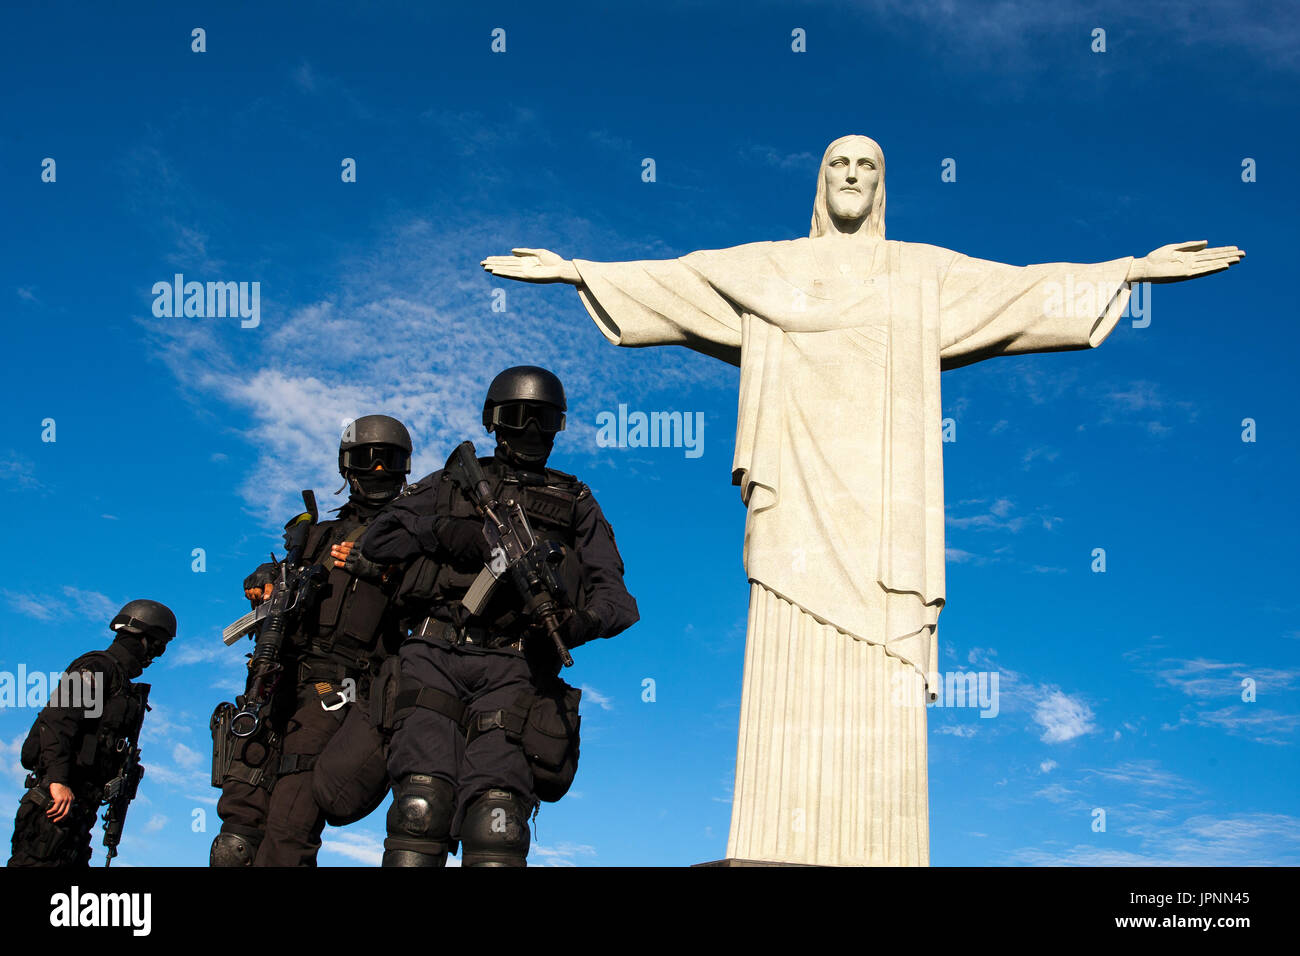 Rio de Janeiro Special Police BOPE make a tactical training in the Christ the Redeemer one of the main tourist attraction in Rio de Janeiro, Brazil Stock Photo